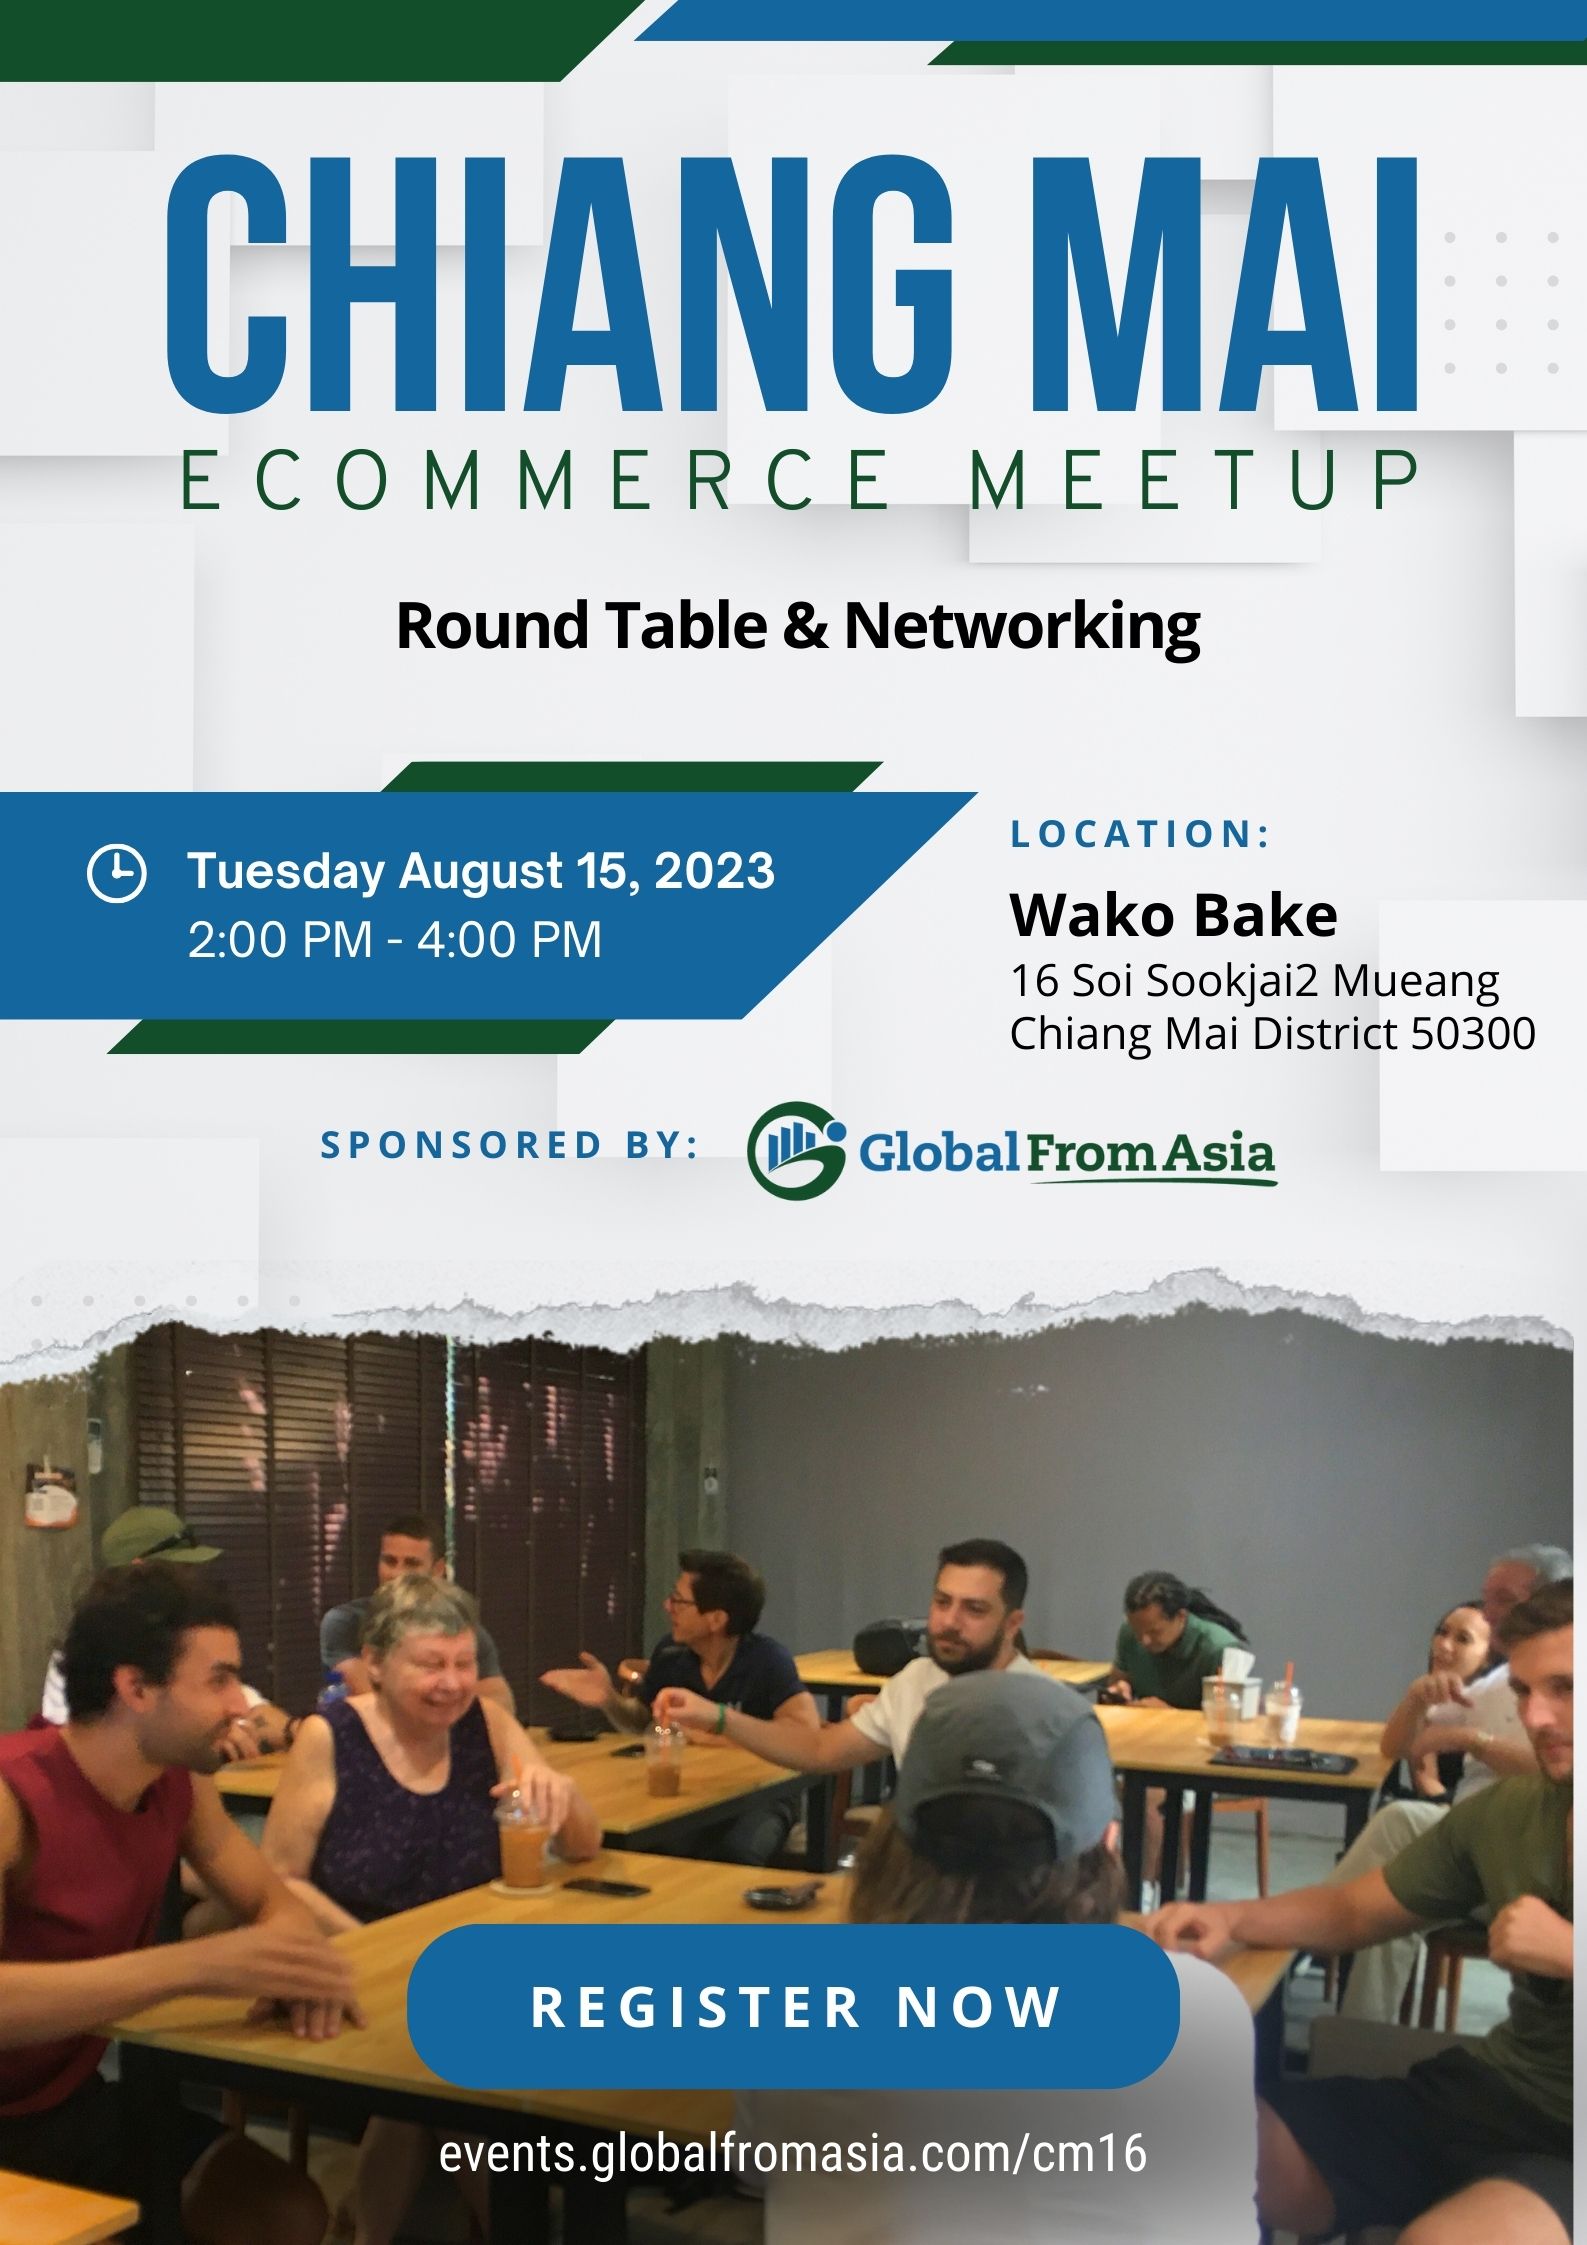 Chiang Mai Ecommerce Round Table & Networking Meet-up